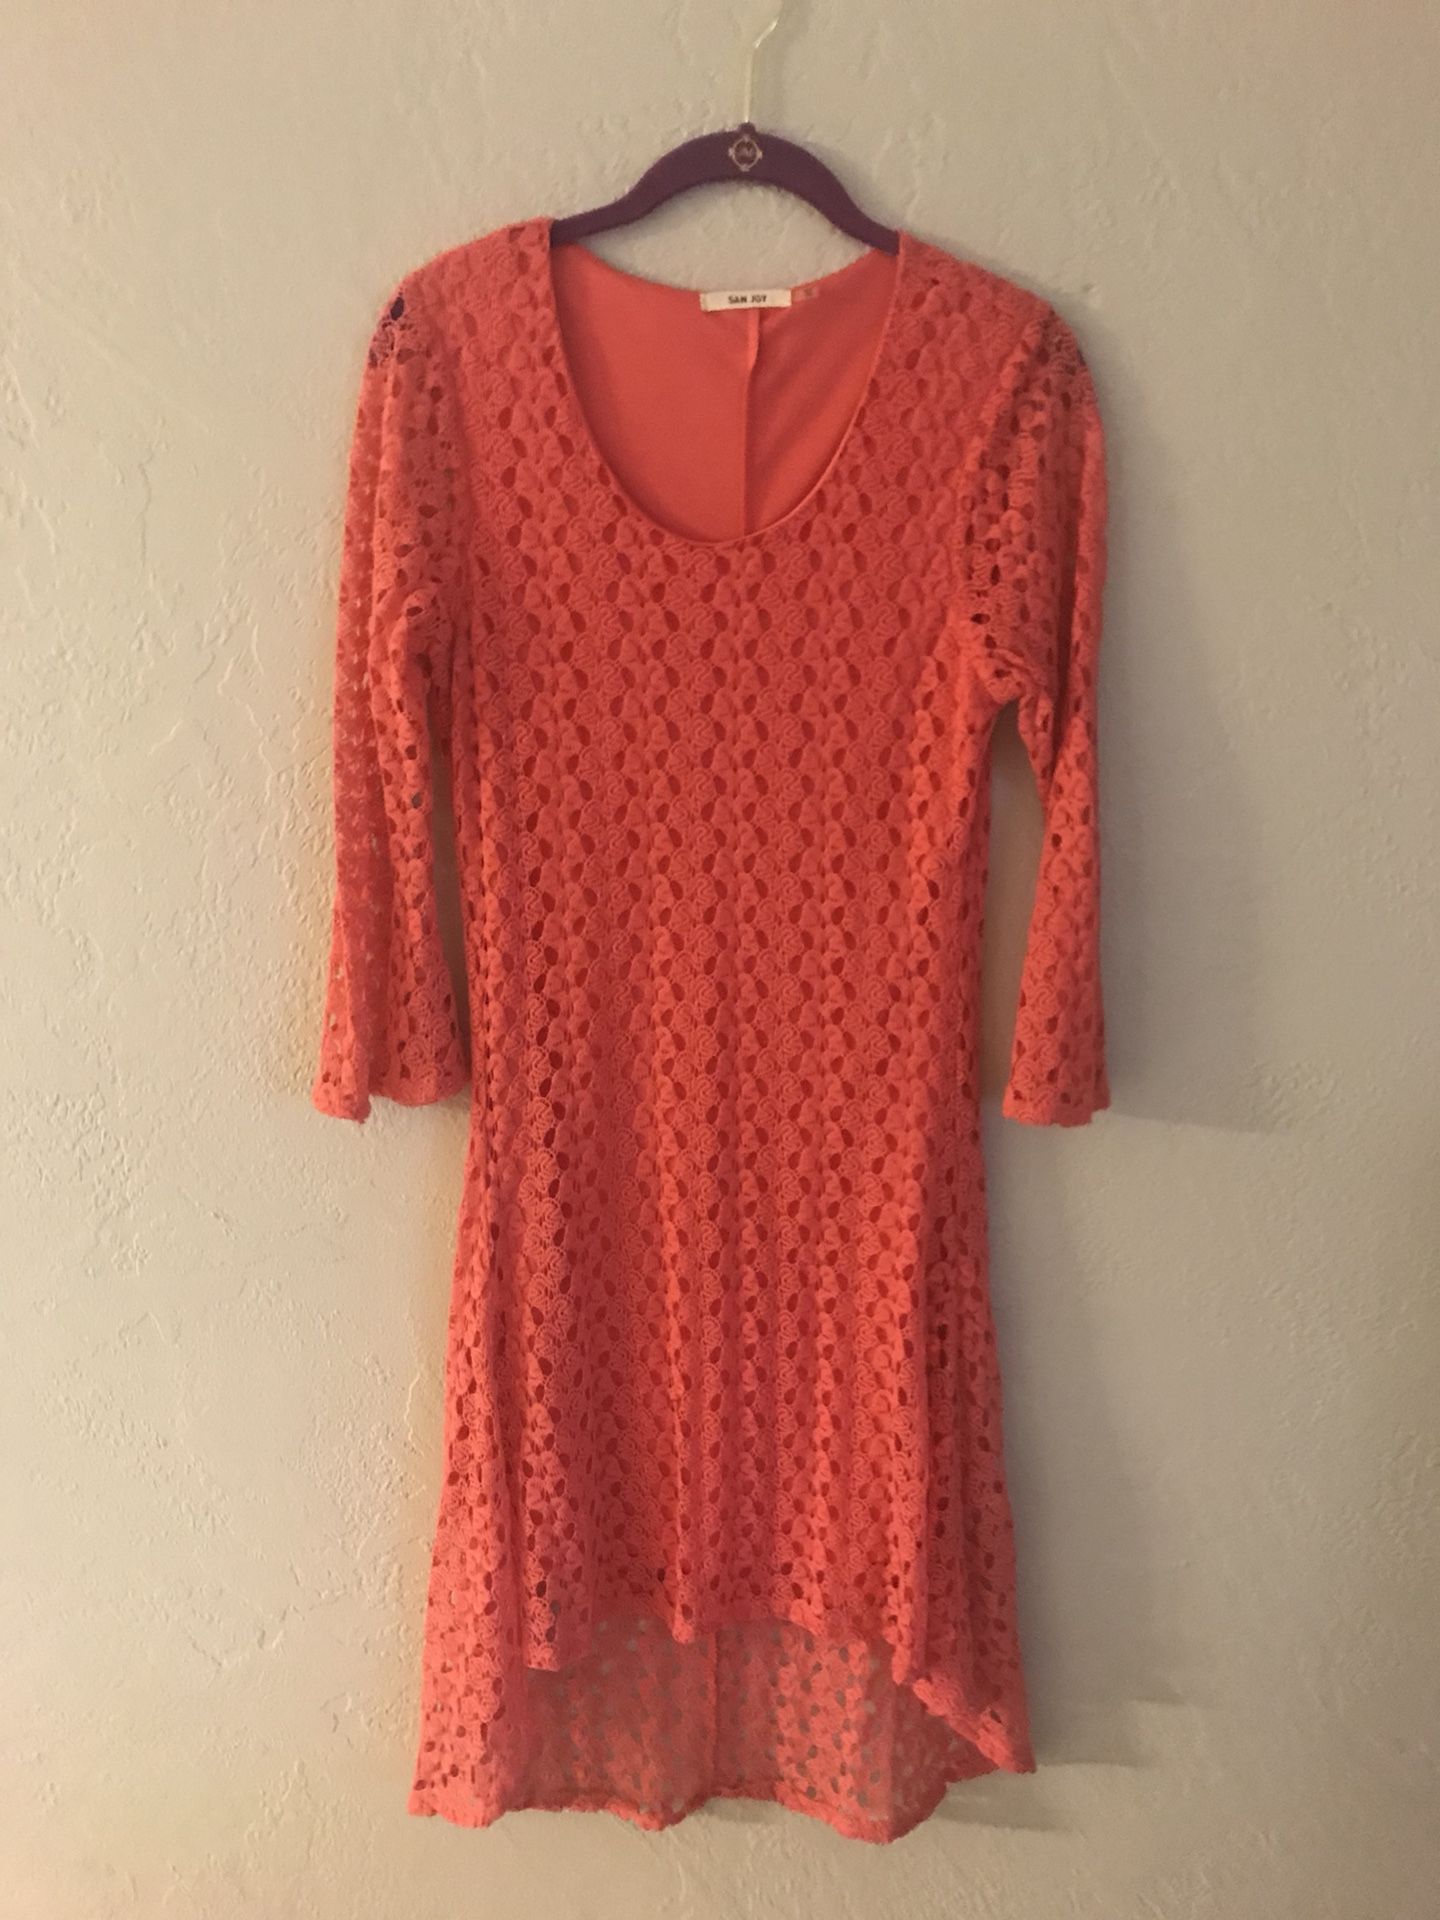 Tangerine beautiful dress. Looks great with cowboy boots too.